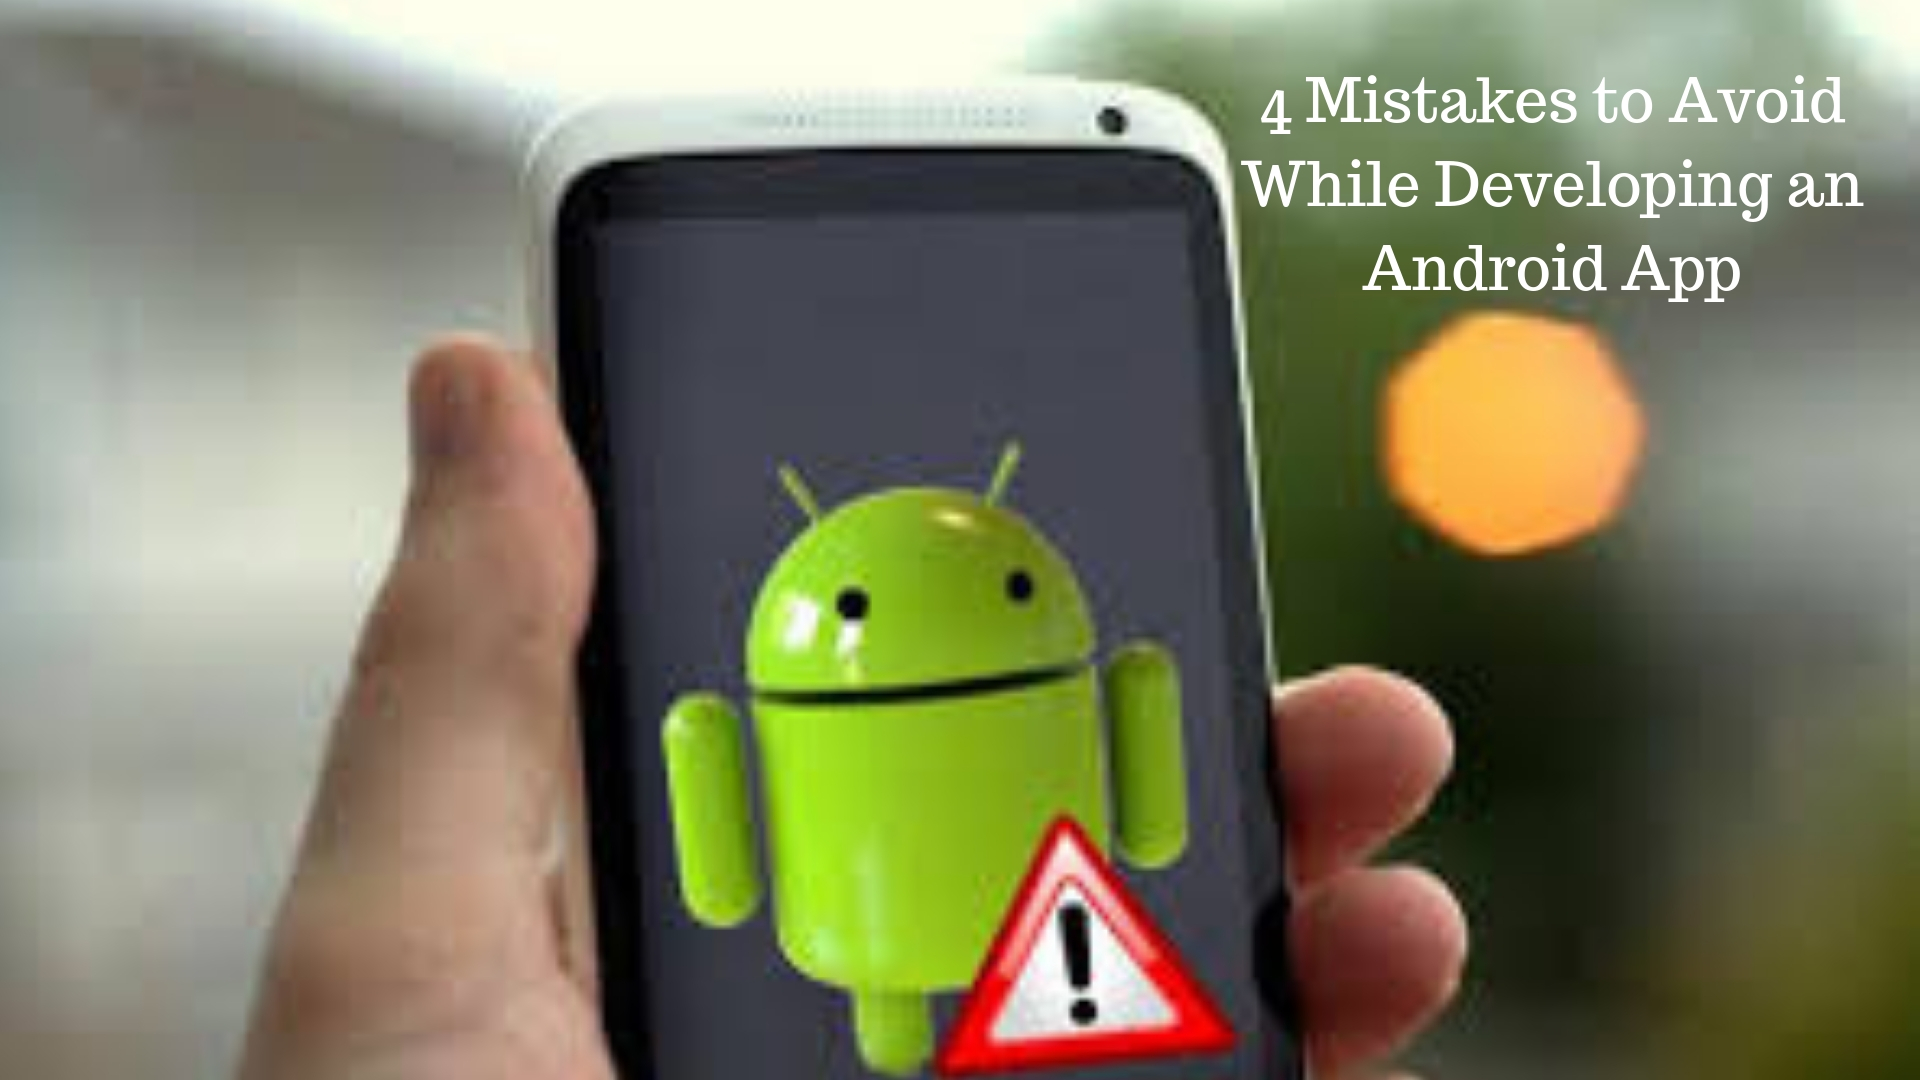 4 Mistakes to Avoid While Developing an Android App